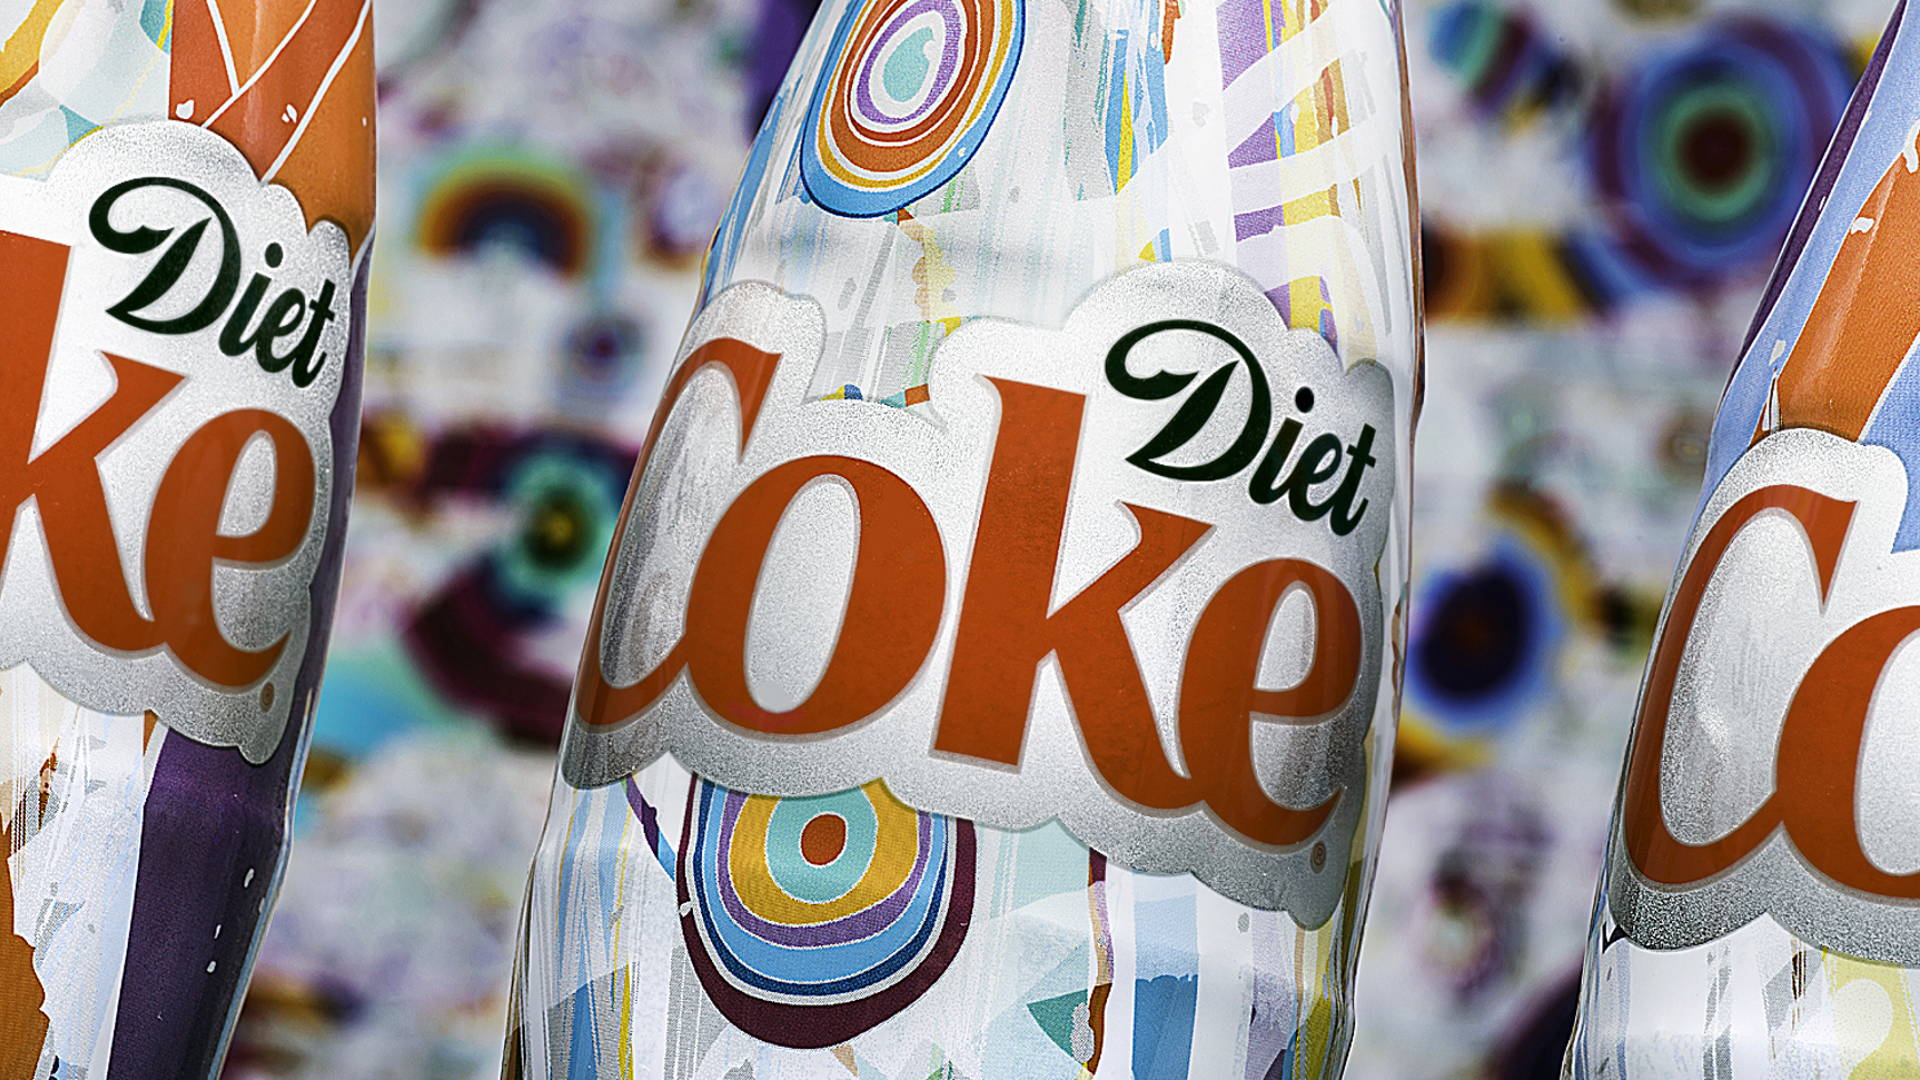 Featured image for This is Not Your Average Diet Coke Packaging